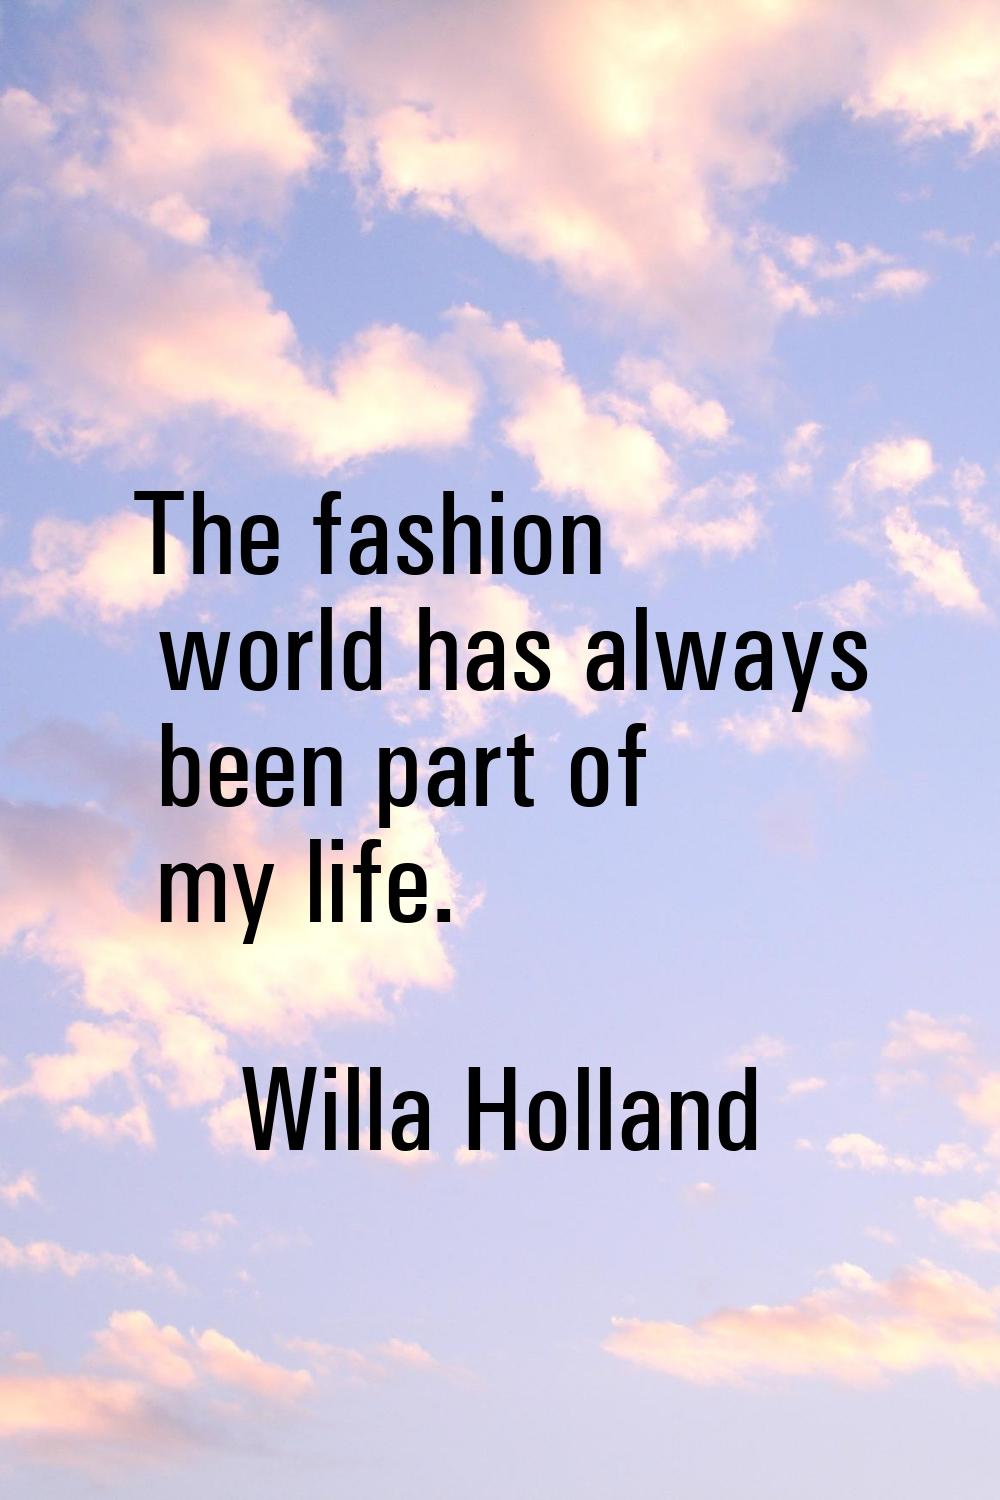 The fashion world has always been part of my life.